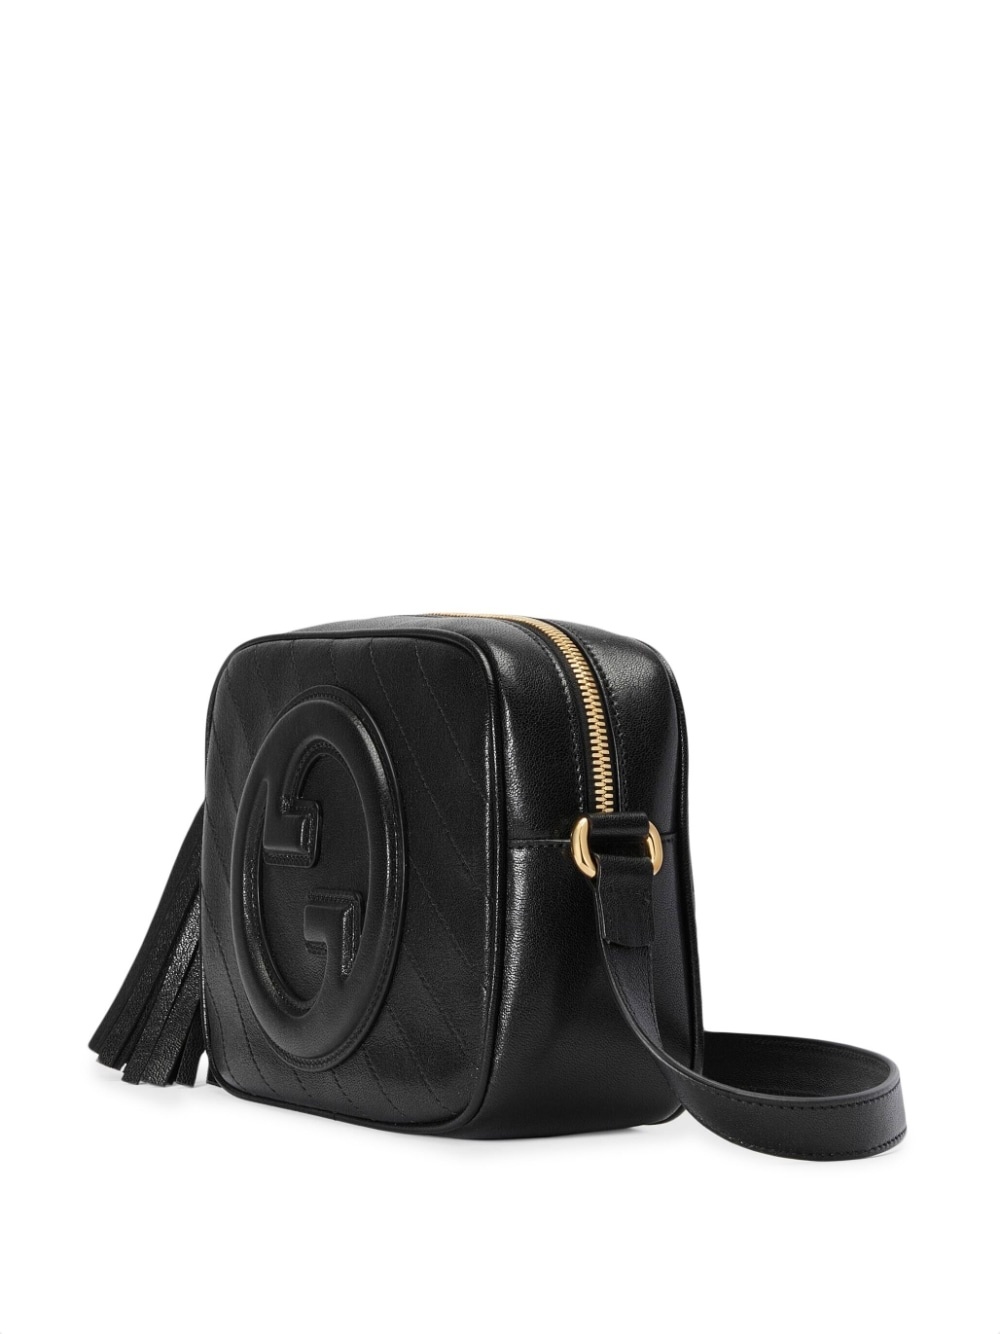 Gucci blondie small leather shoulder bag - 5